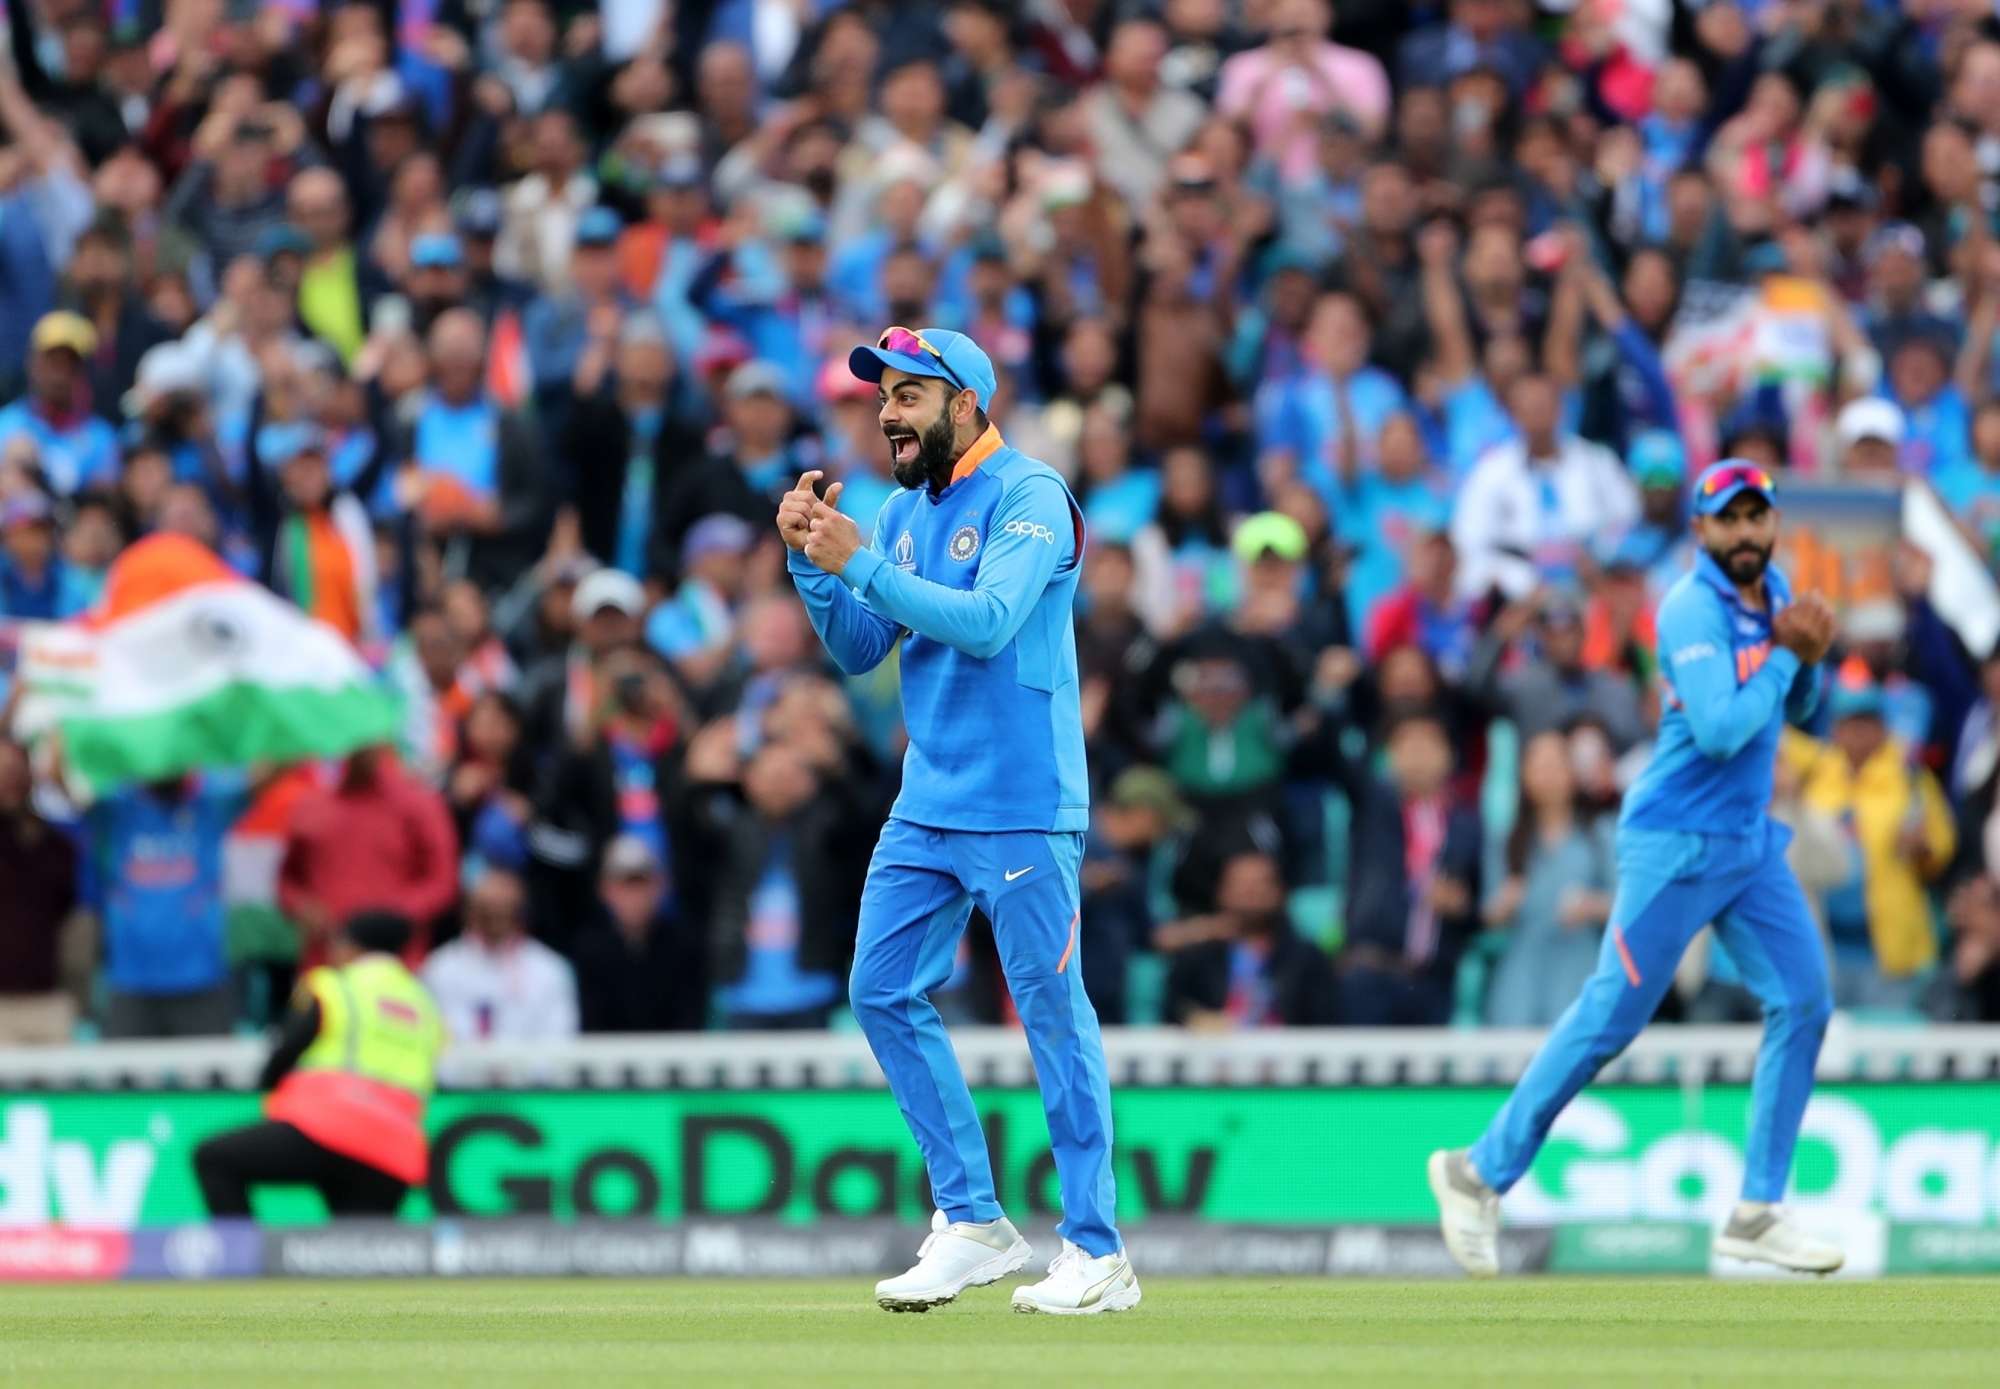 ICC Cricket World Cup 2019 viewership so far on Hotstar is far from the IPL peak